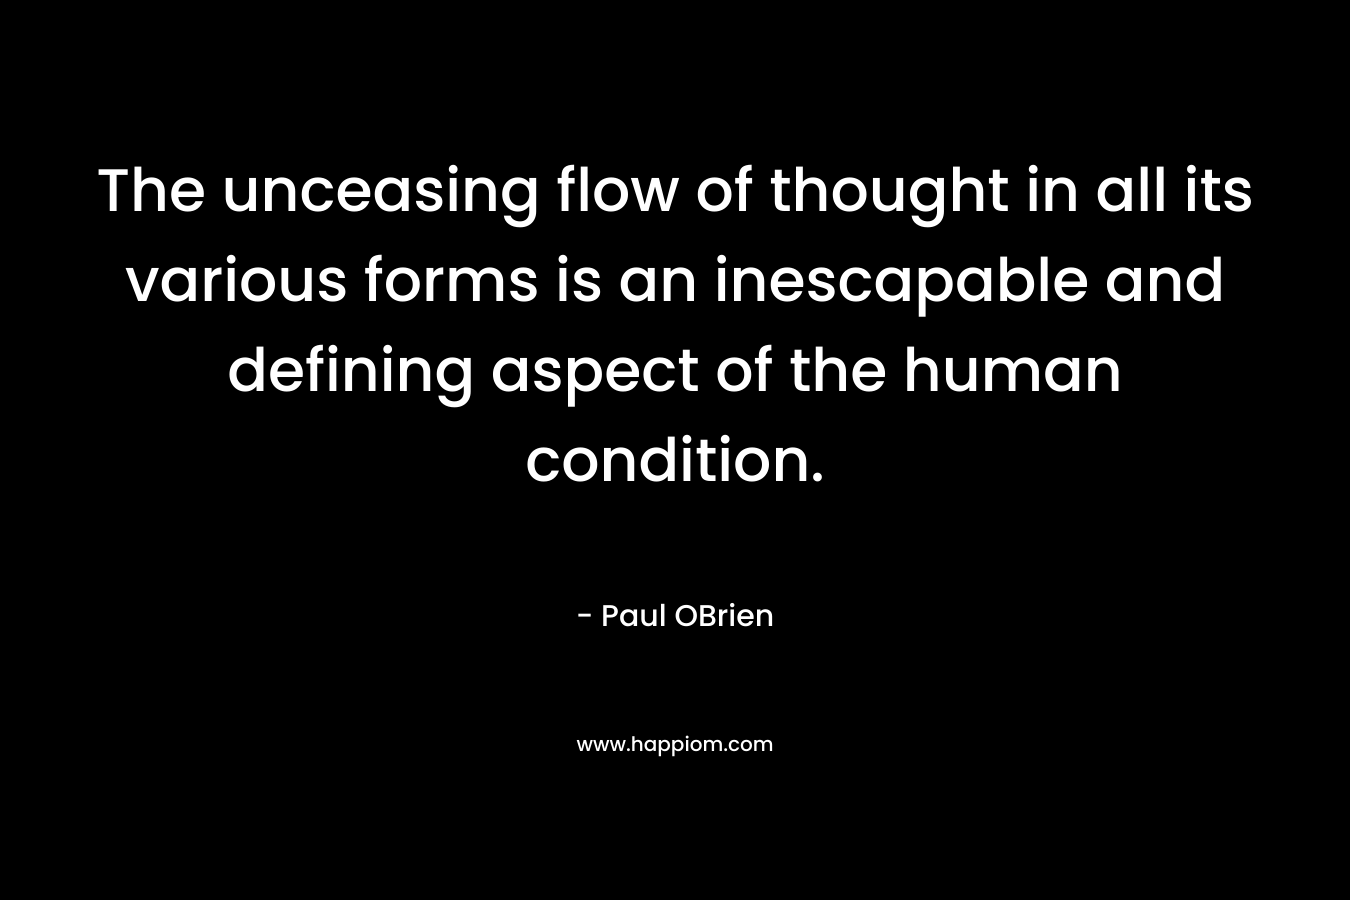 The unceasing flow of thought in all its various forms is an inescapable and defining aspect of the human condition.